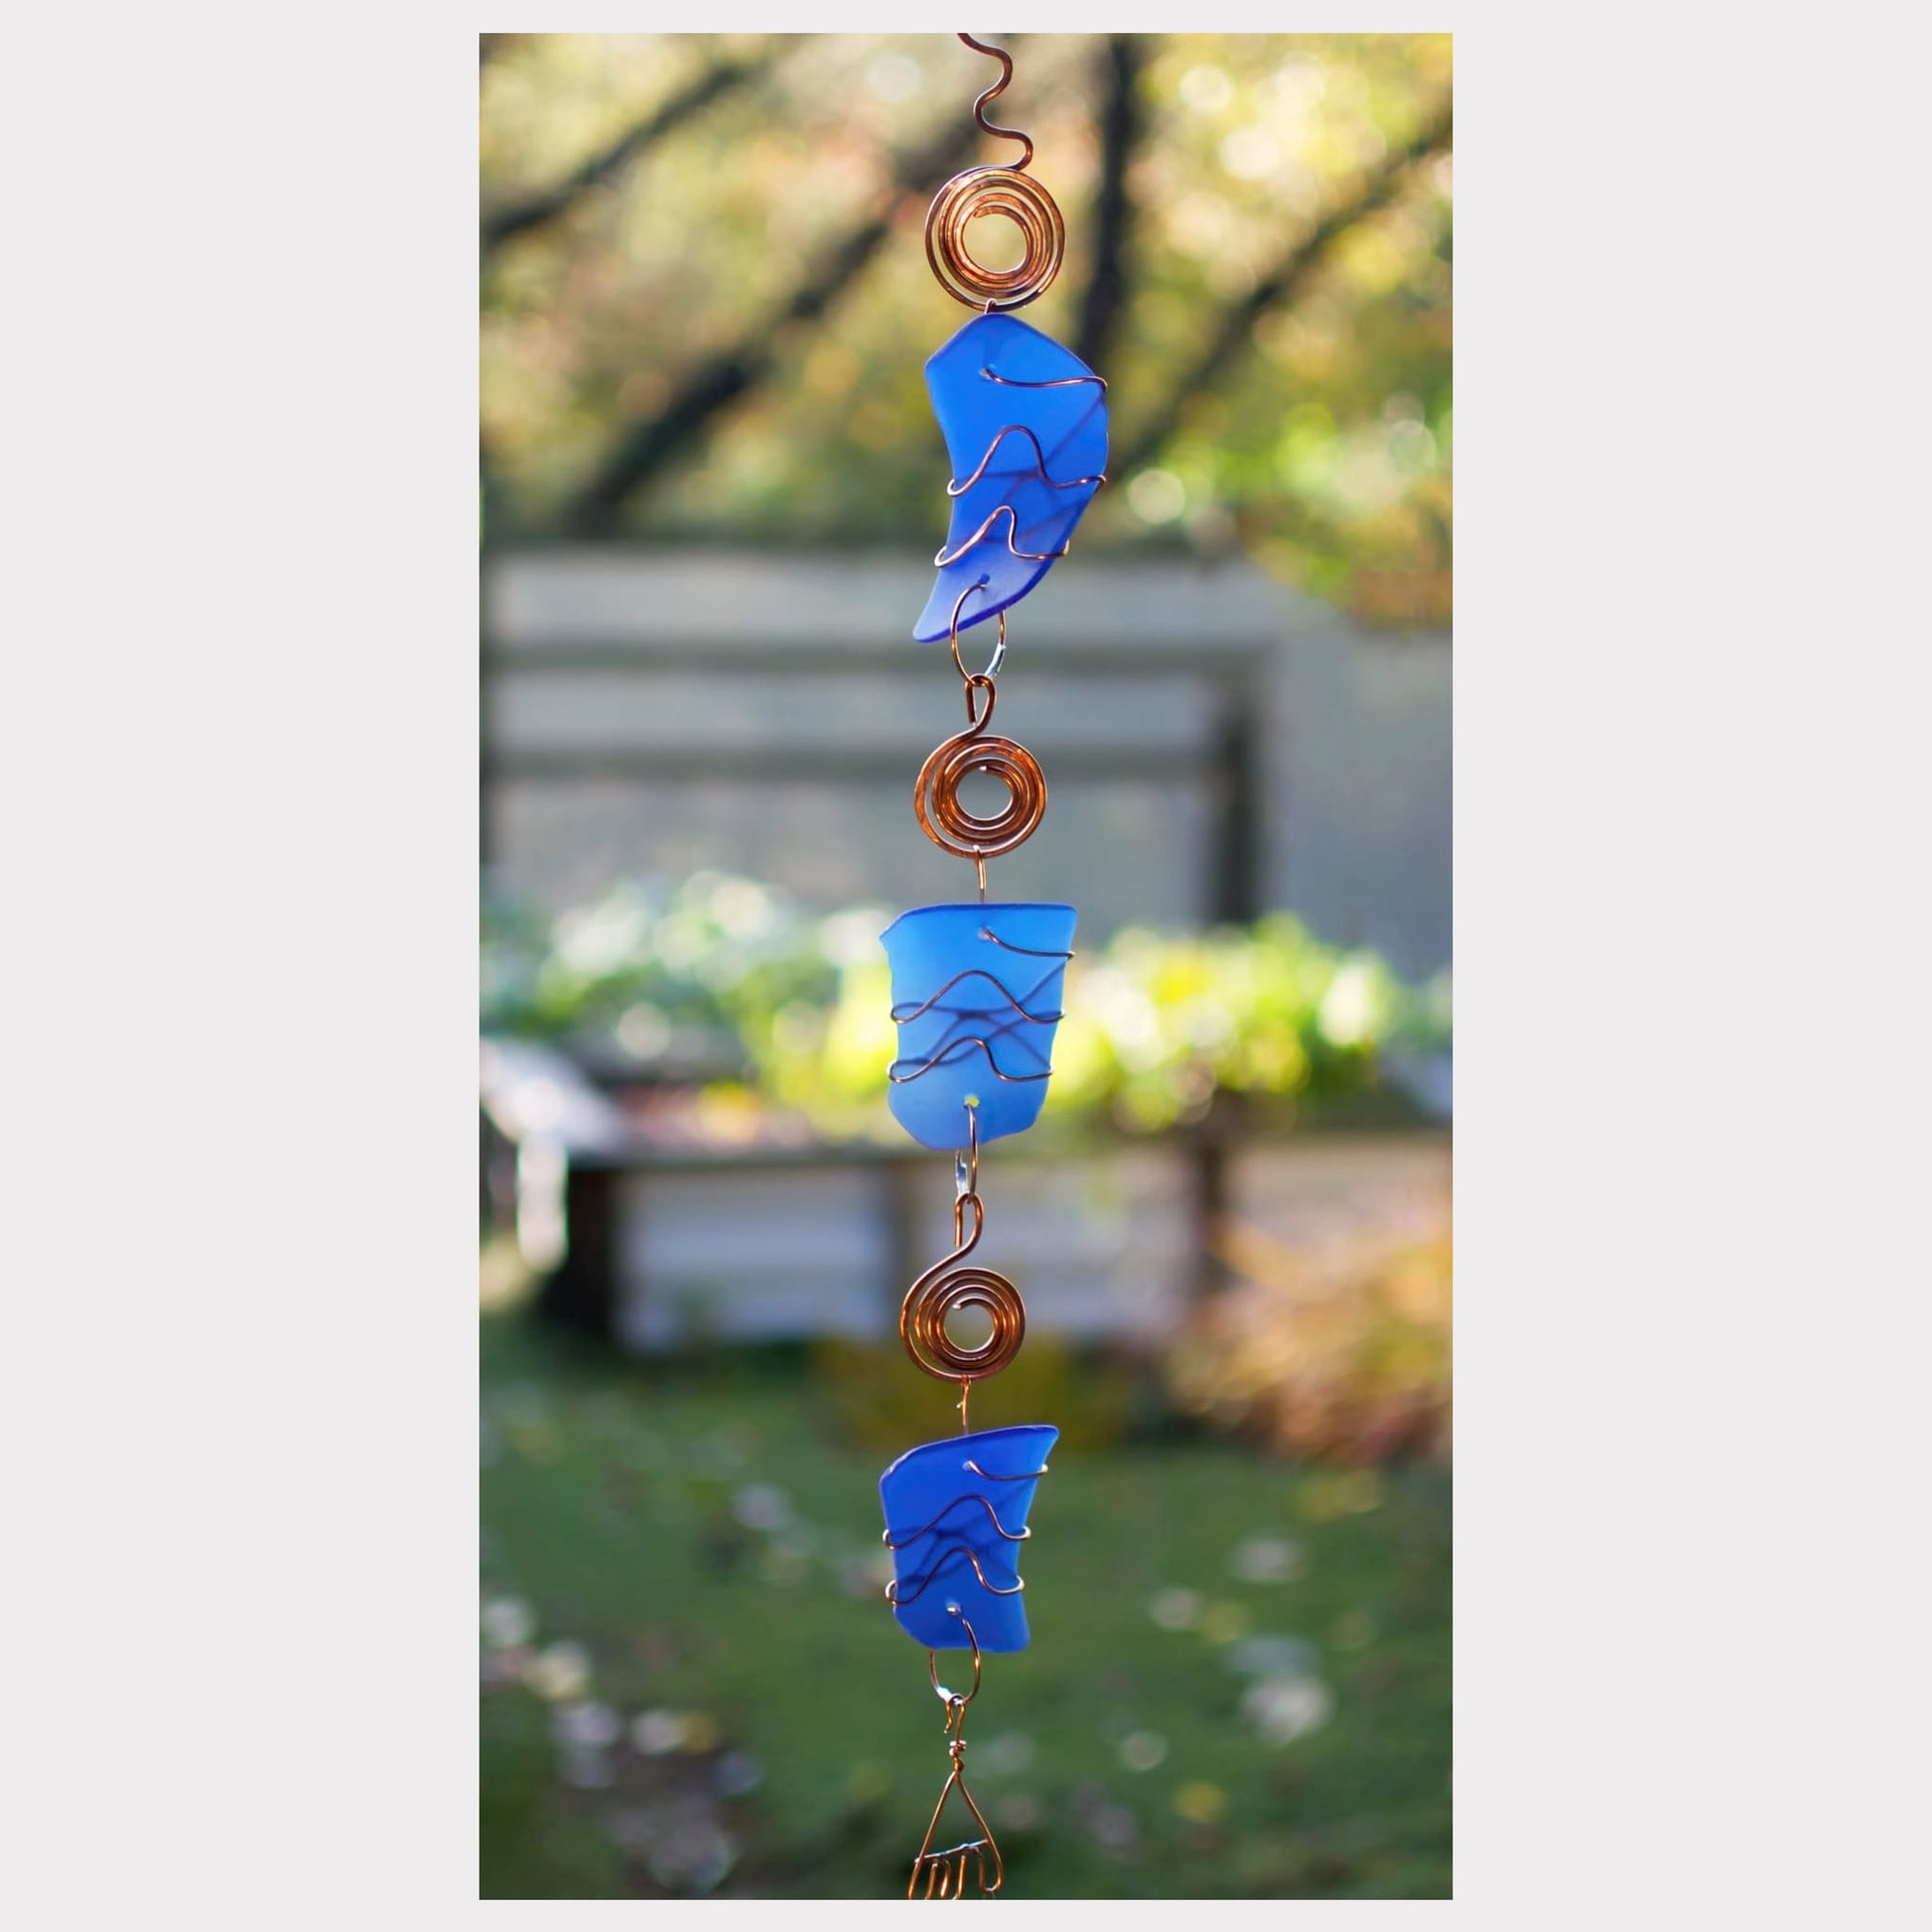 detail, blue glass wind chime